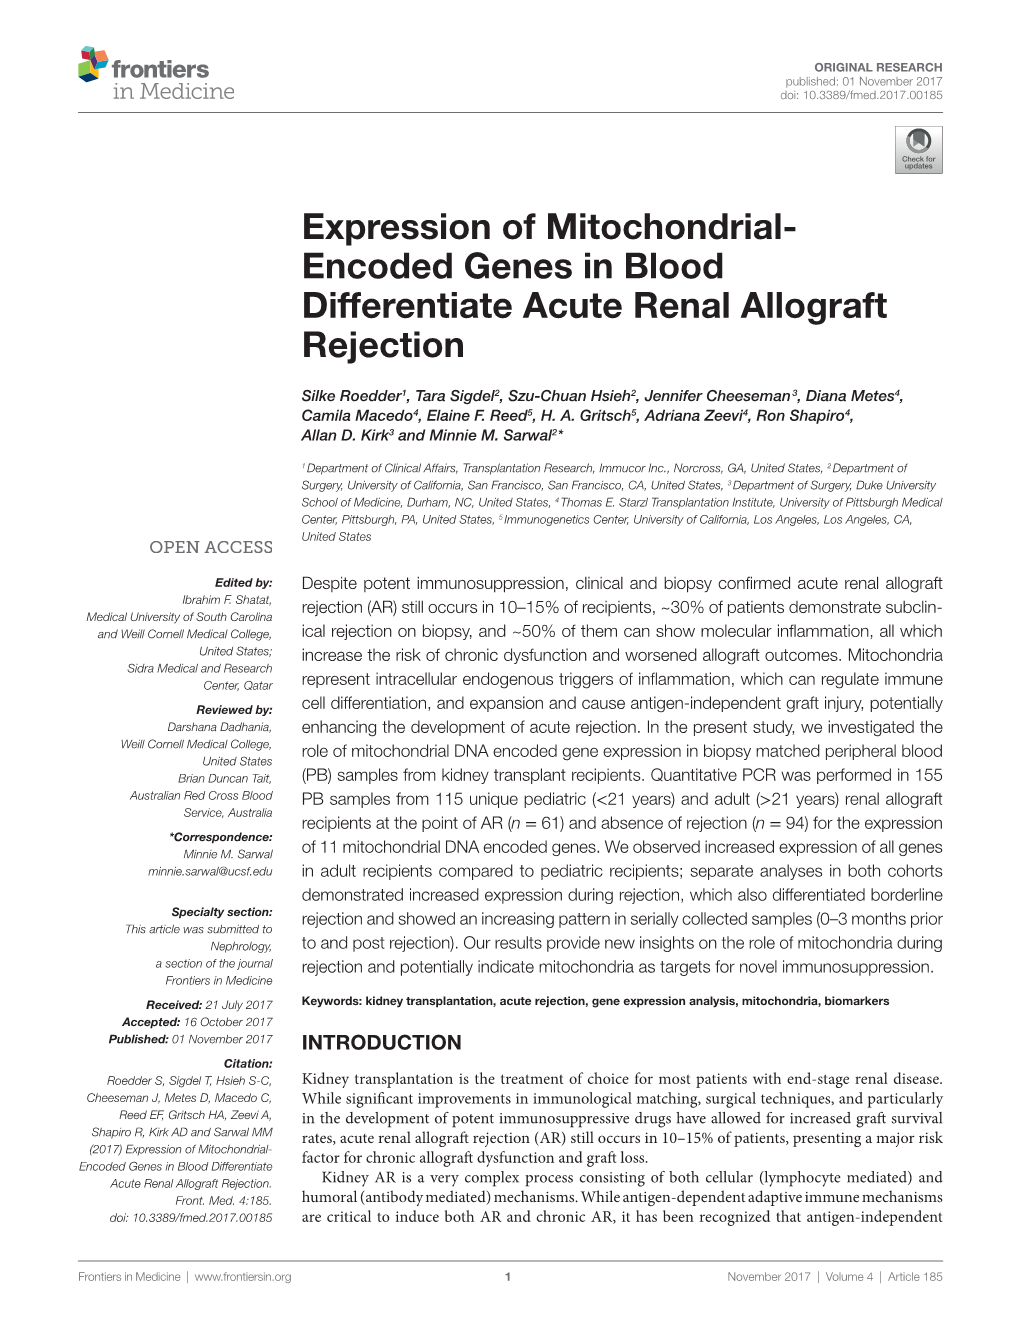 Expression of Mitochondrial-Encoded Genes in Blood Differentiate Acute